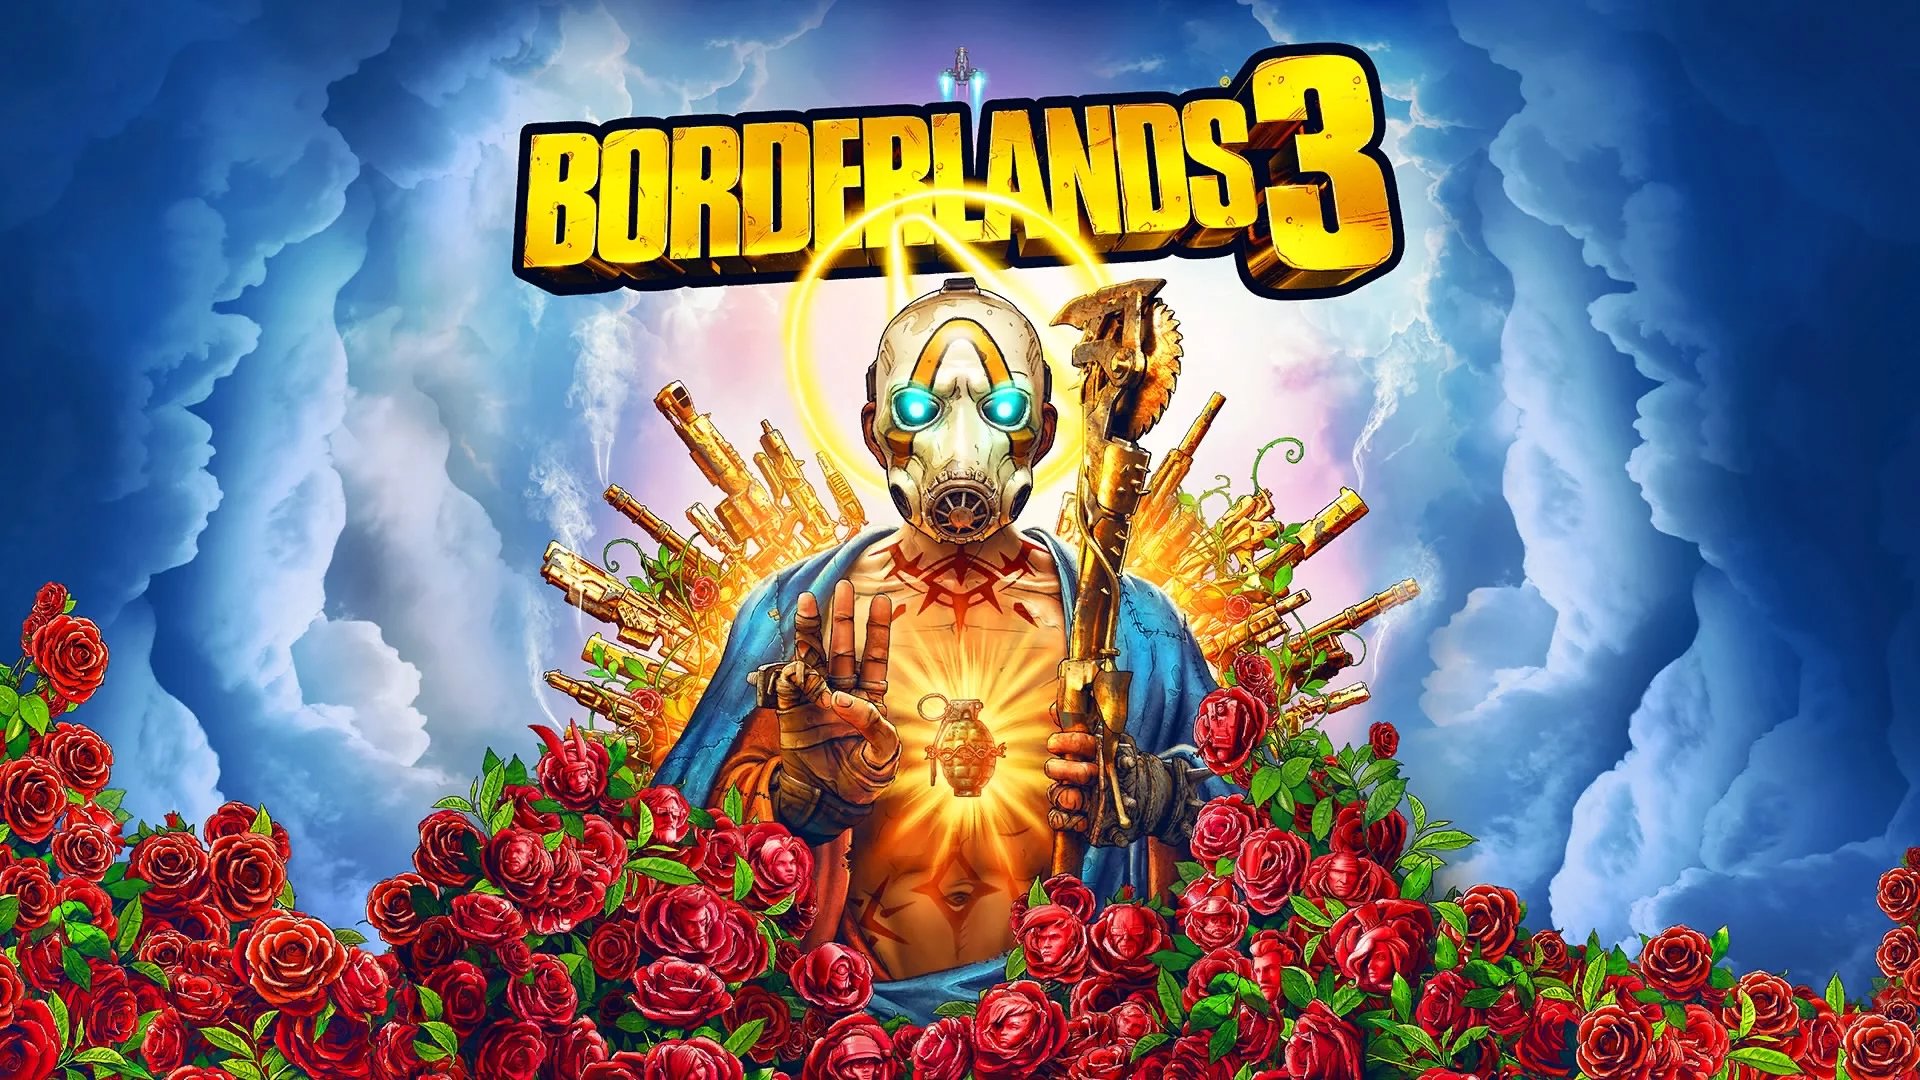 Borderlands 3 is pretty much the same craziness, and it's true that we wanted to